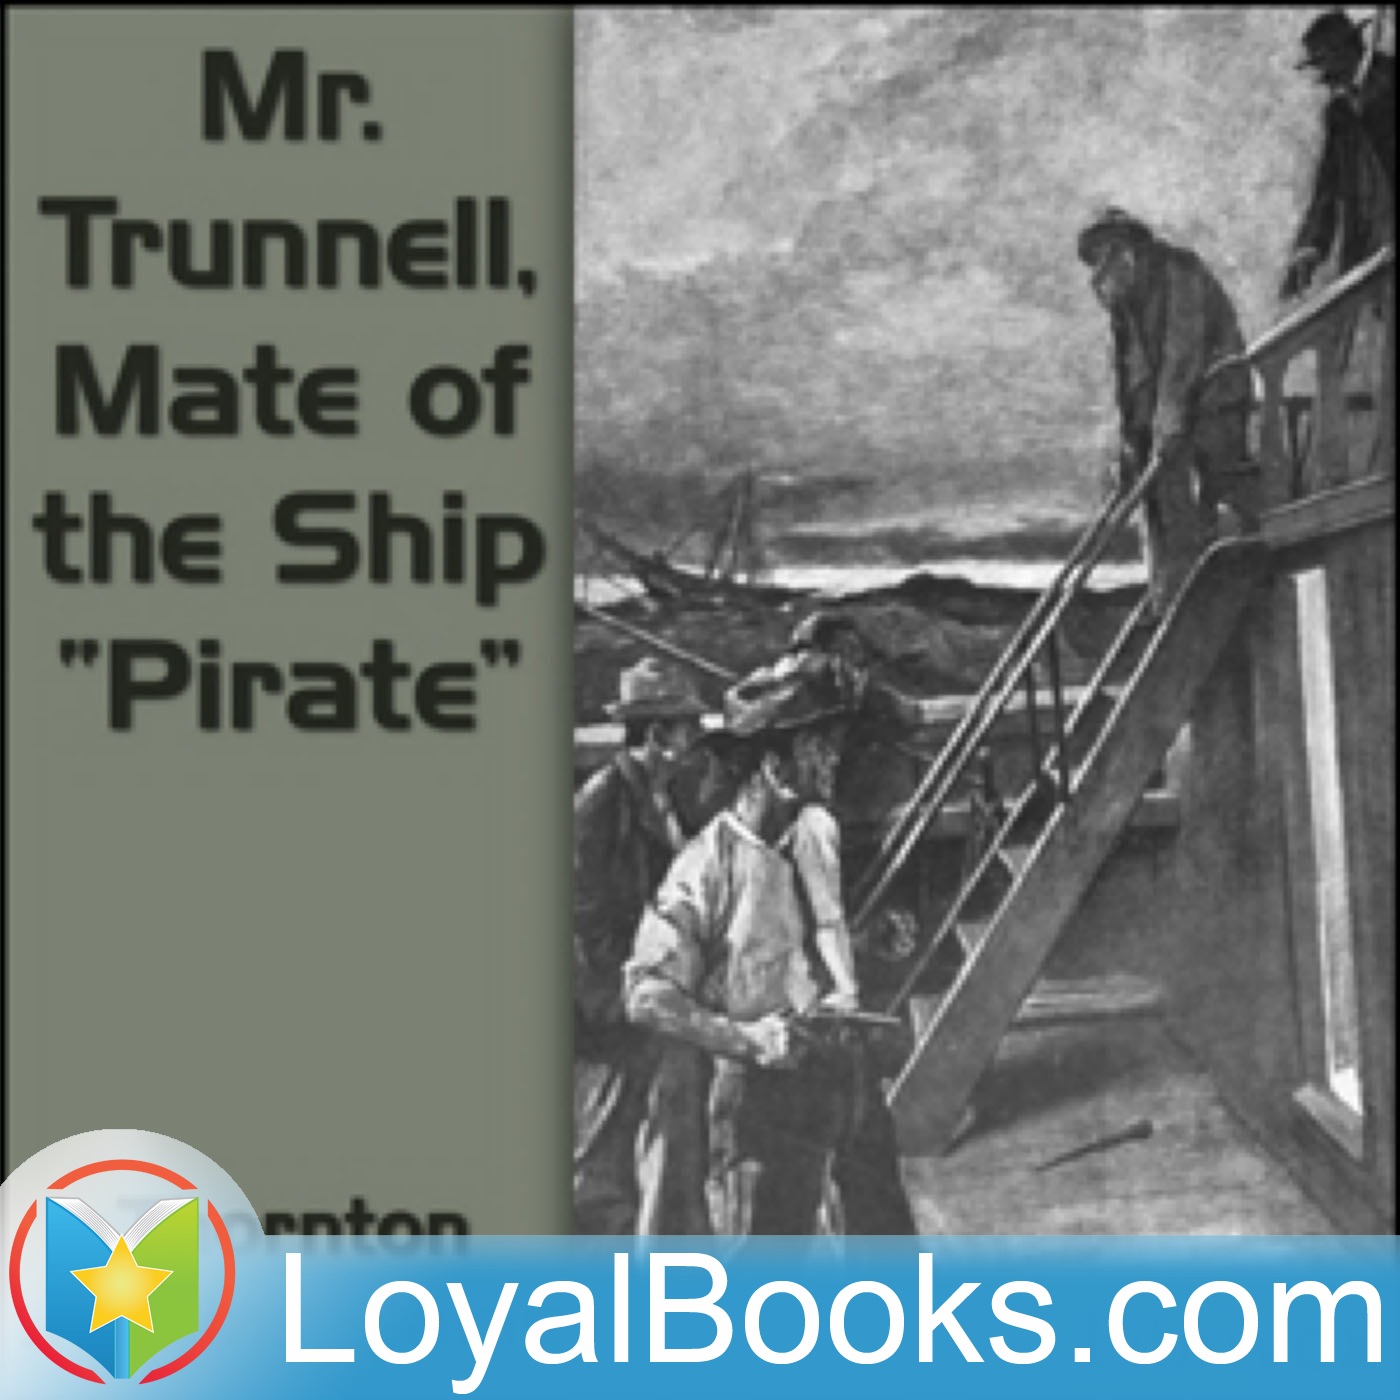 Mr. Trunnell, Mate of the Ship “Pirate” by Thornton Jenkins Hains